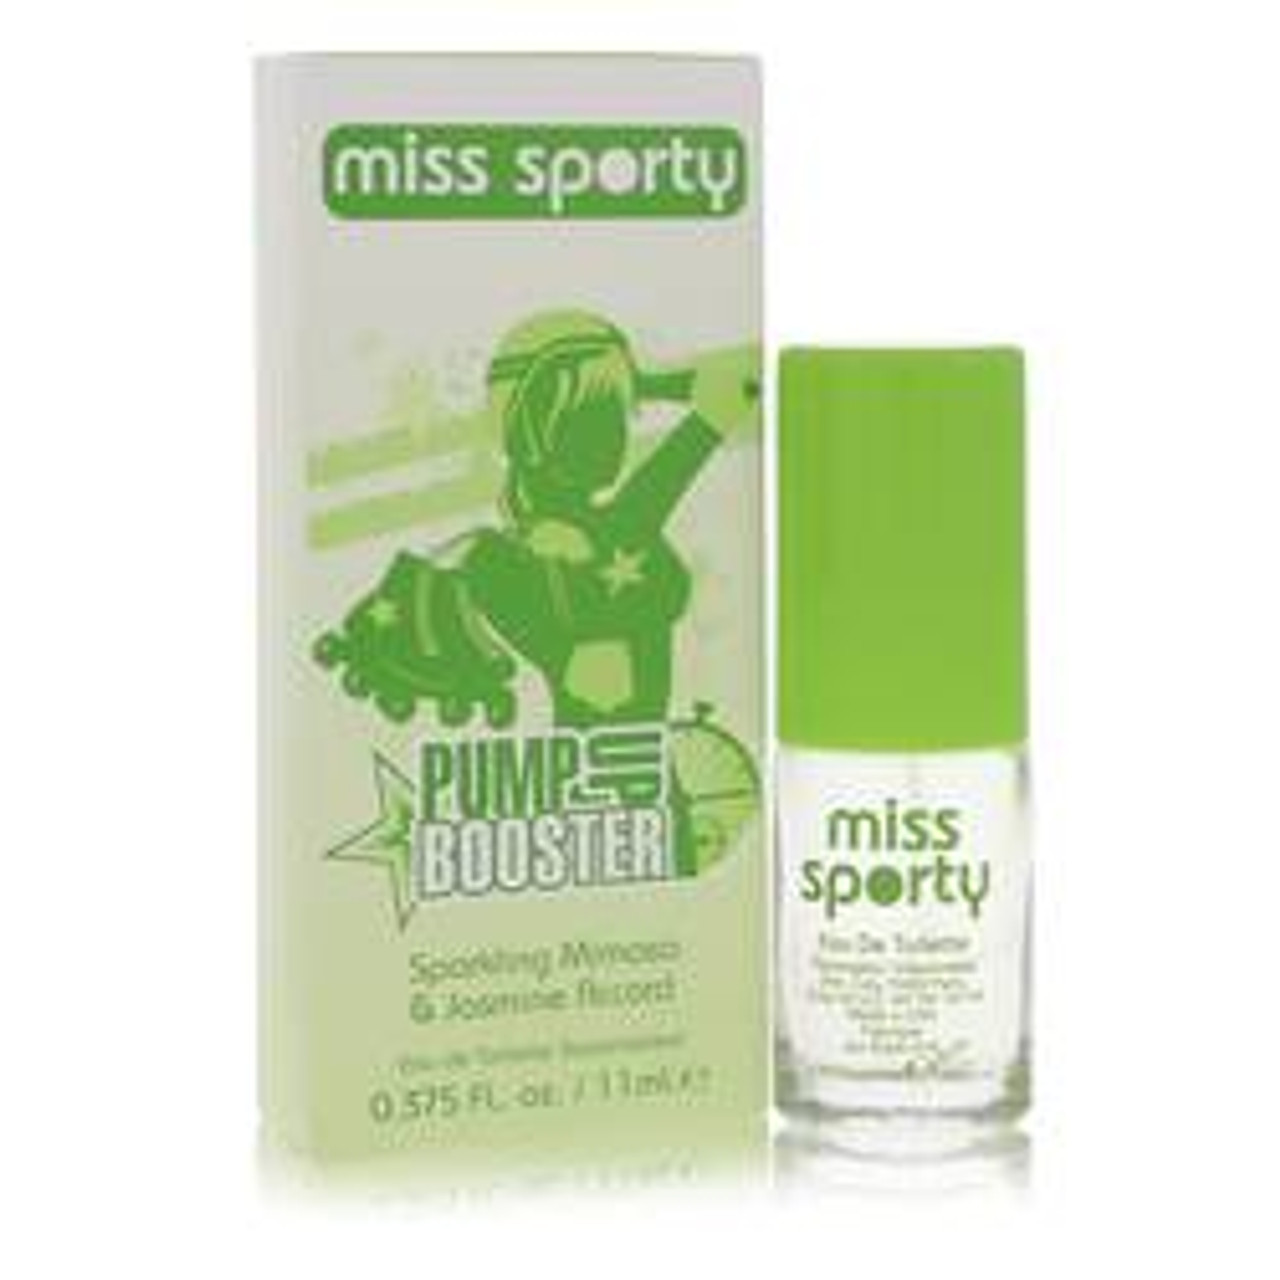 Miss Sporty Pump Up Booster Perfume By Coty Sparkling Mimosa & Jasmine Accord Eau De Toilette Spray 0.38 oz for Women - [From 11.00 - Choose pk Qty ] - *Ships from Miami